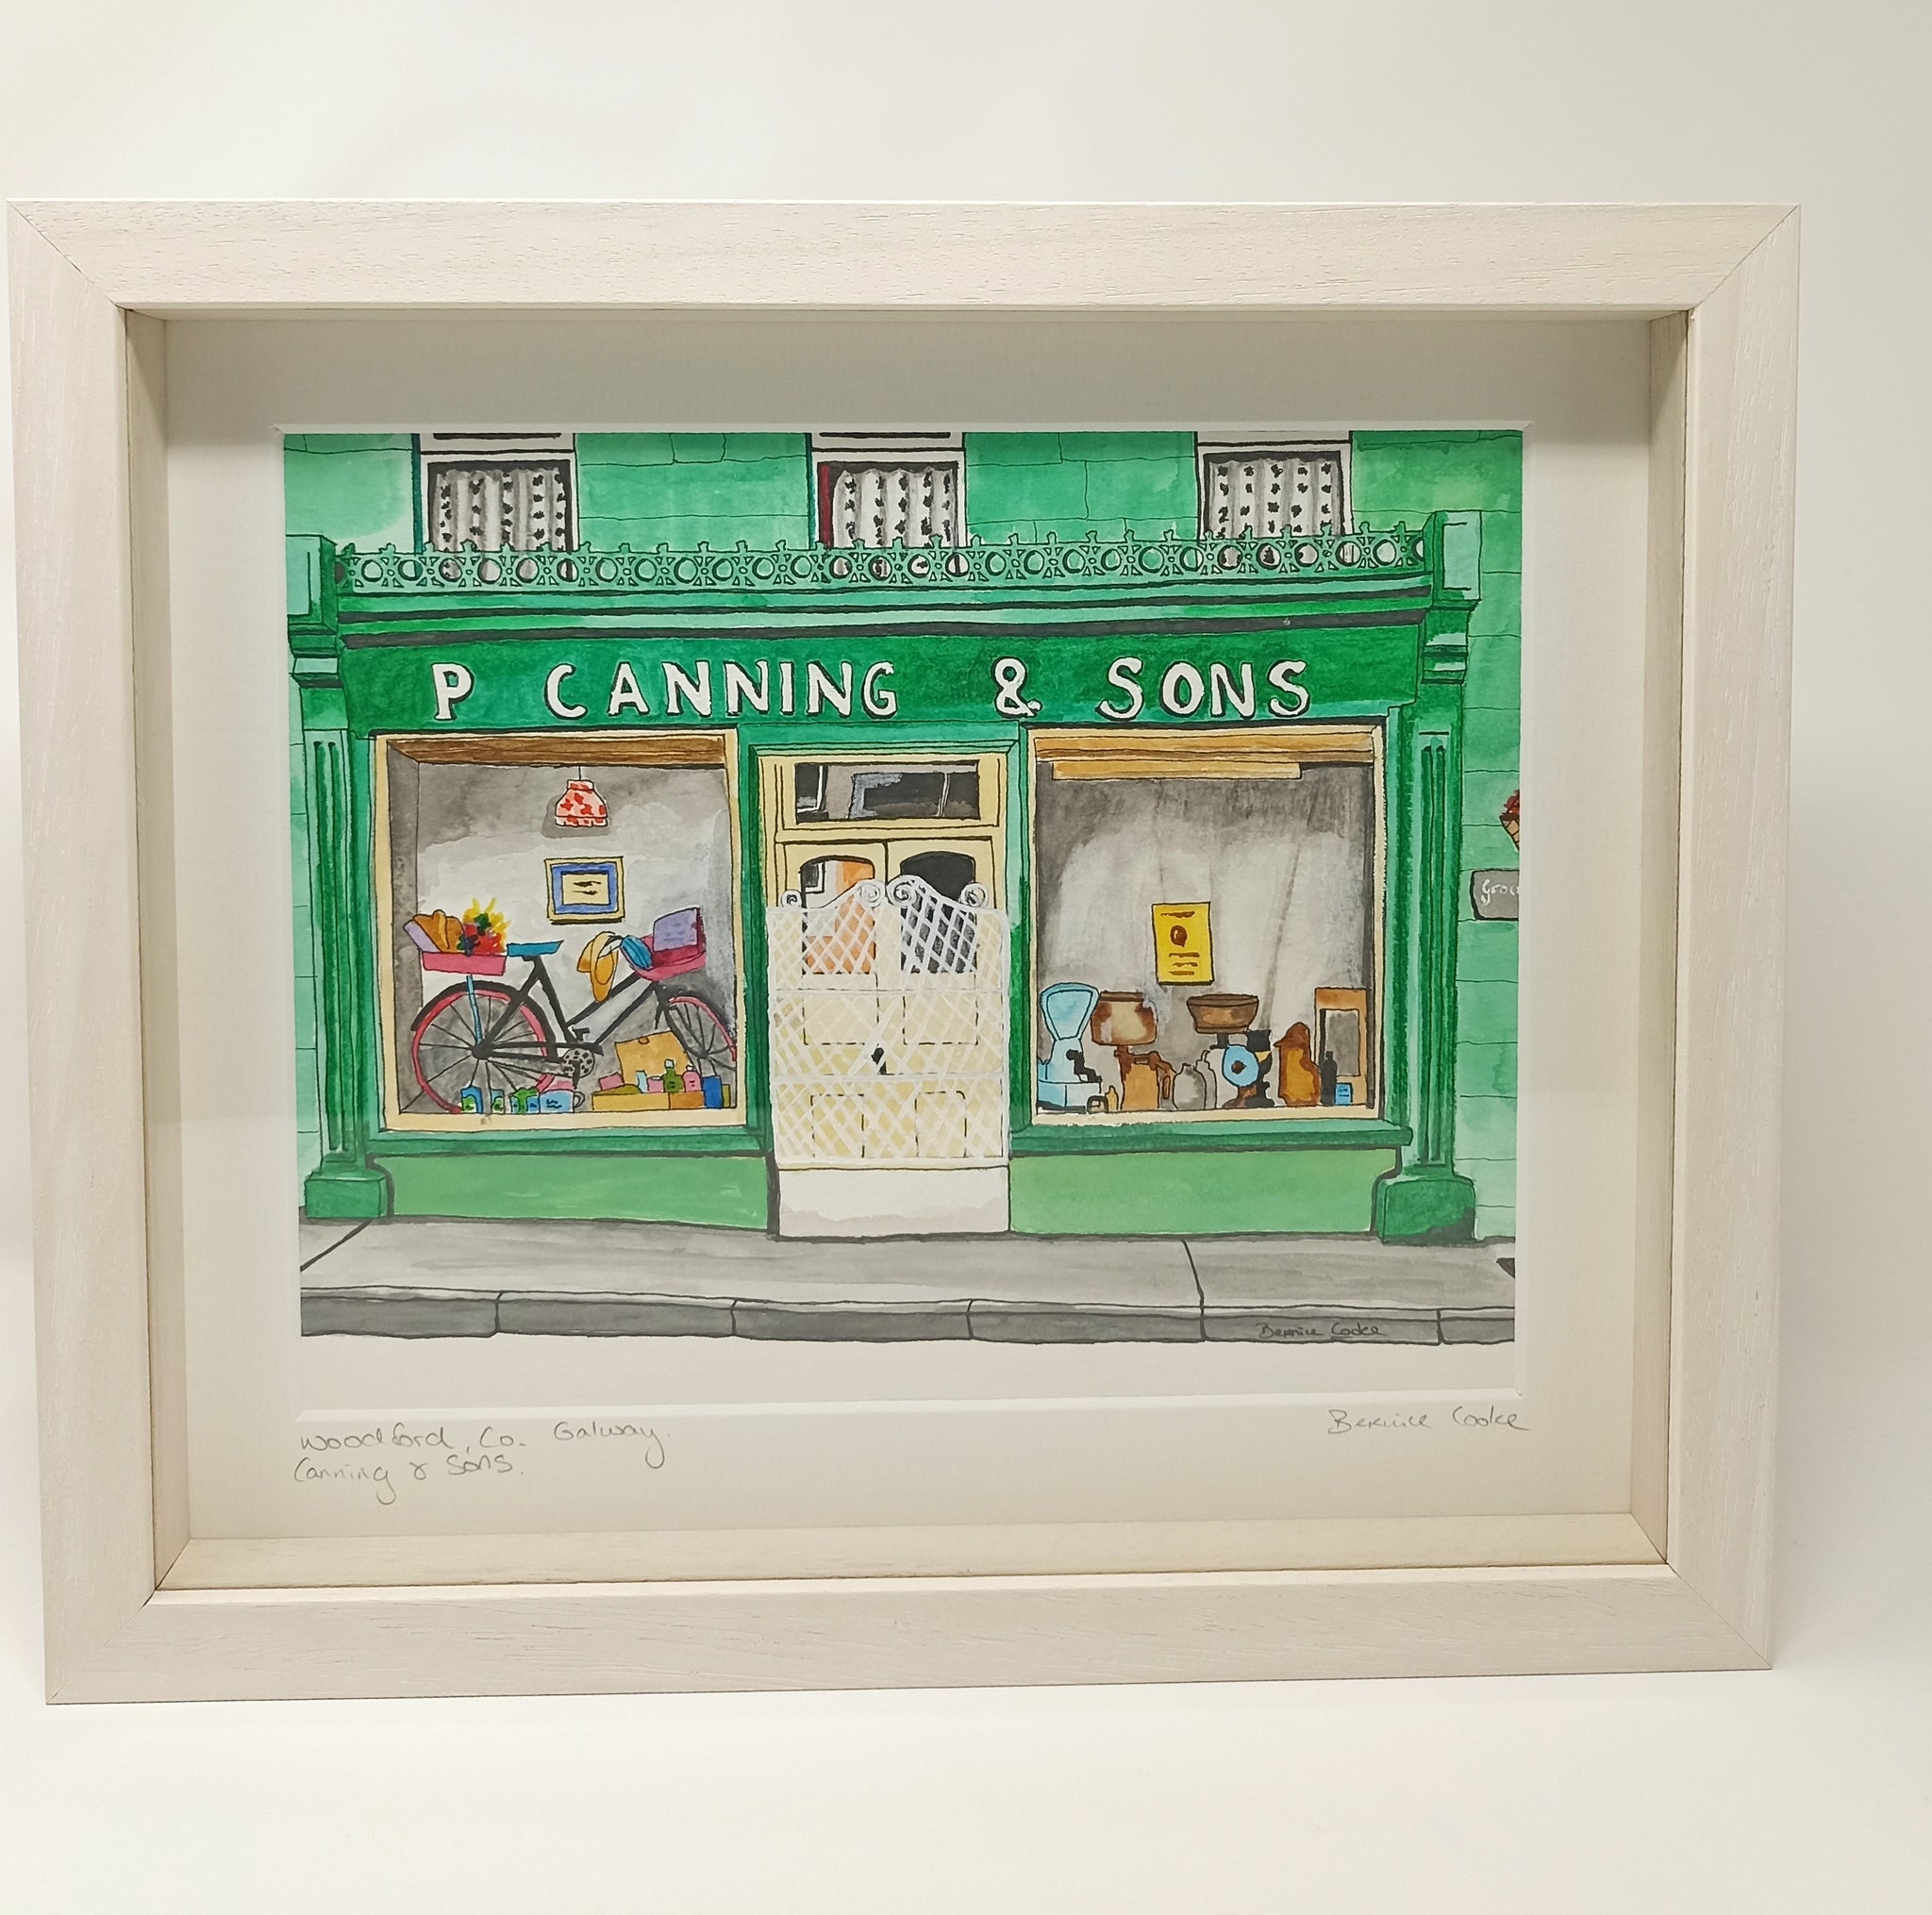 Canning & Sons Old Shop Front, Woodford, Co. Galway, Ireland. Original Painting Pen and Watercolor